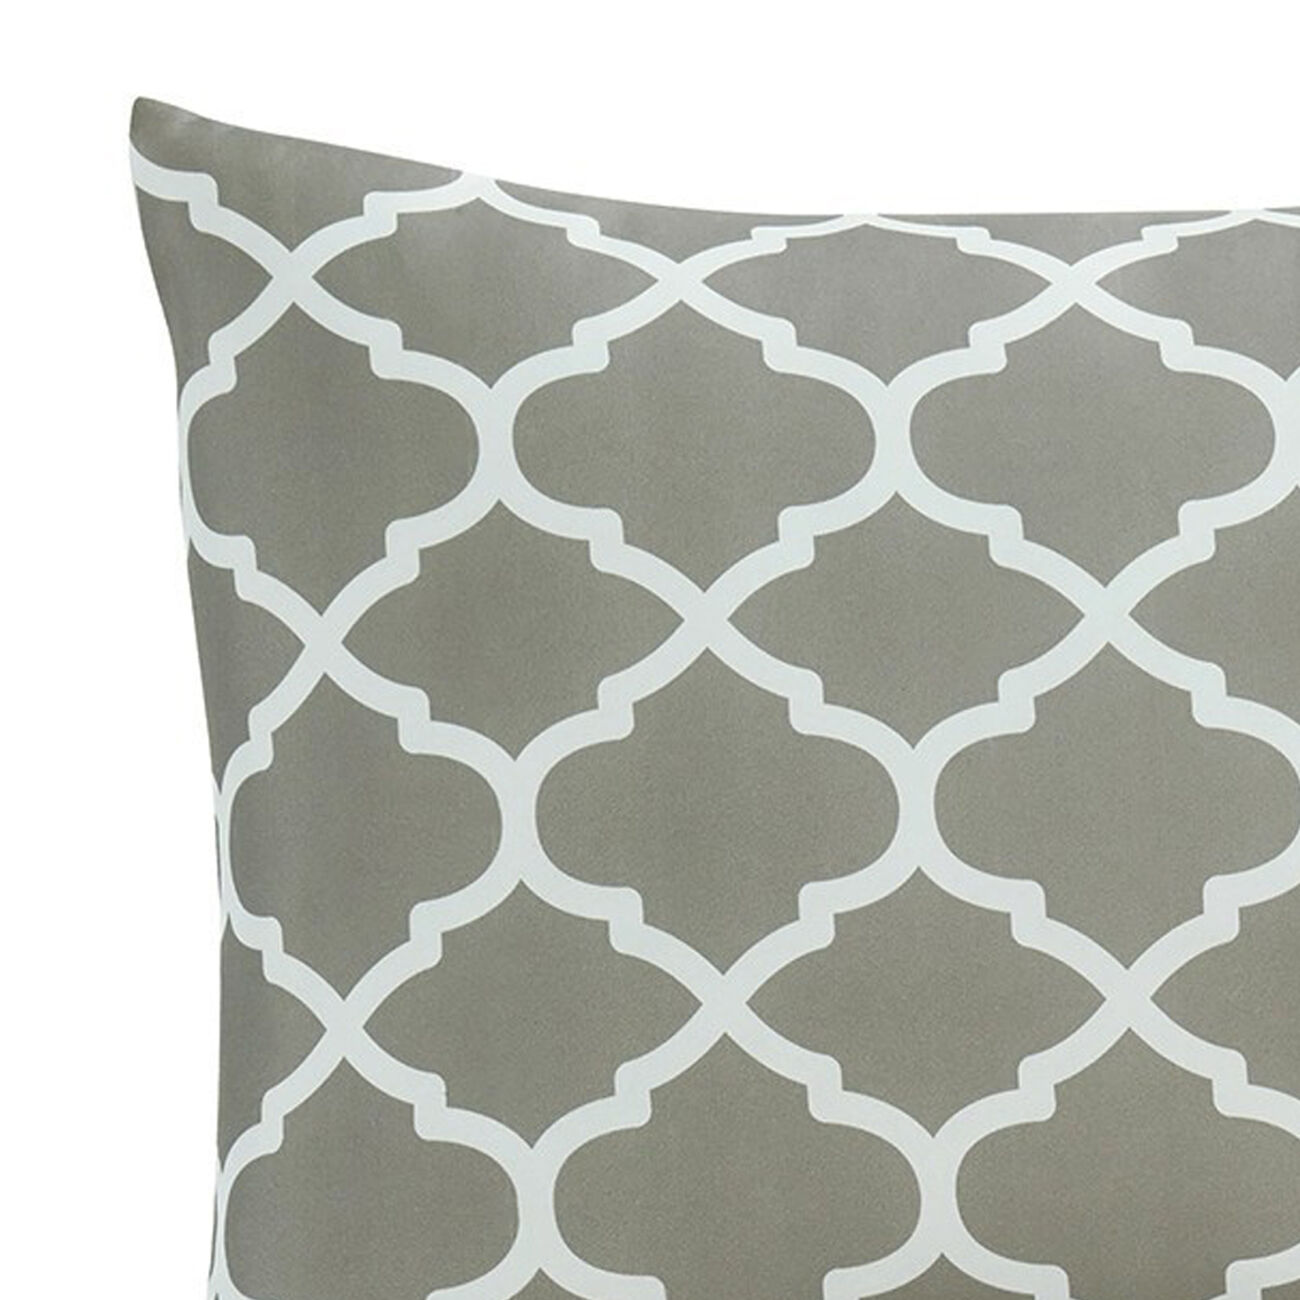 3 Piece Queen Comforter Set with Quatrefoil Design, Gray and White